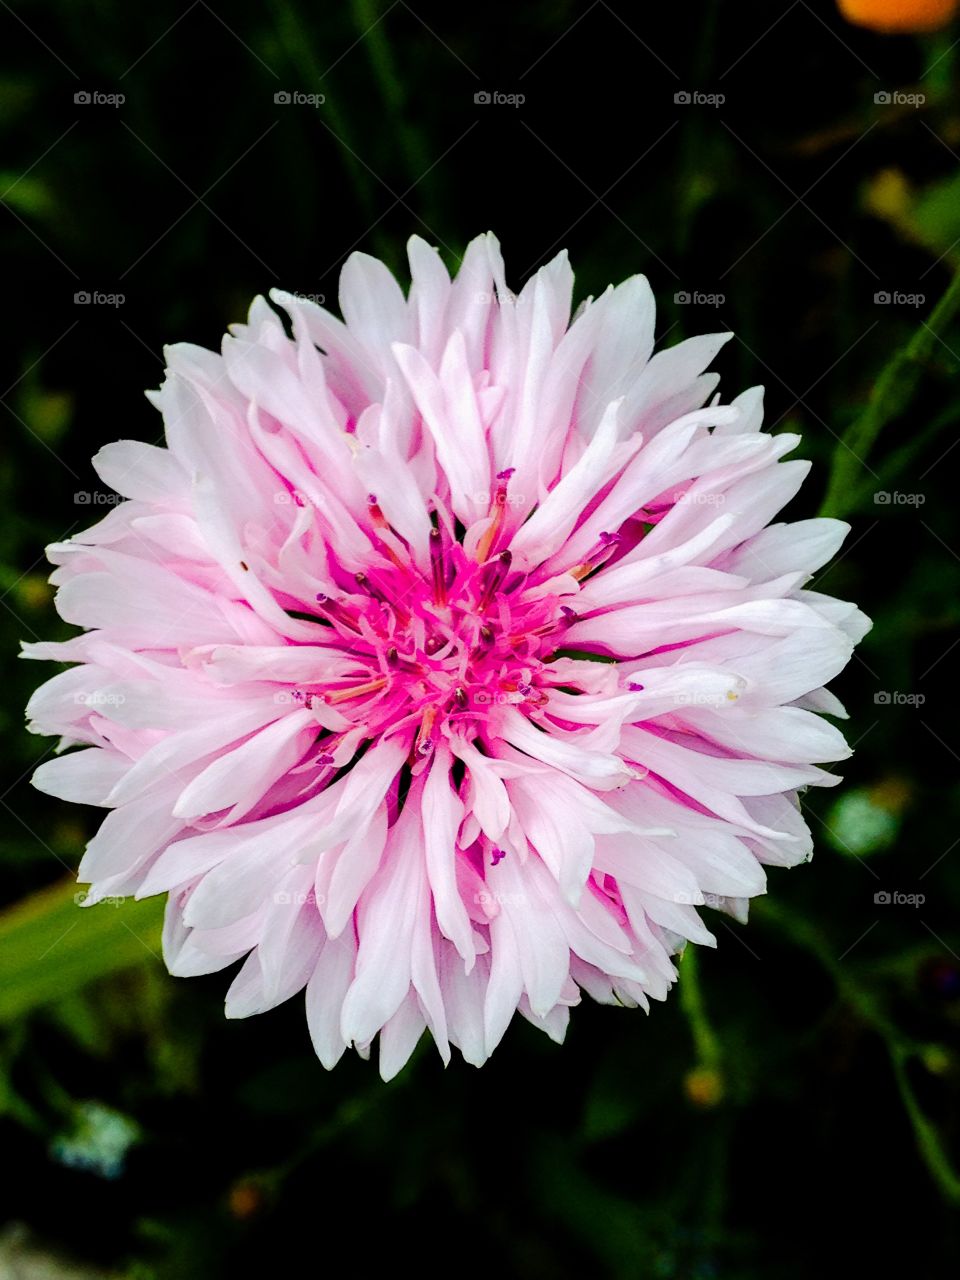 Flower. Pink and white flower